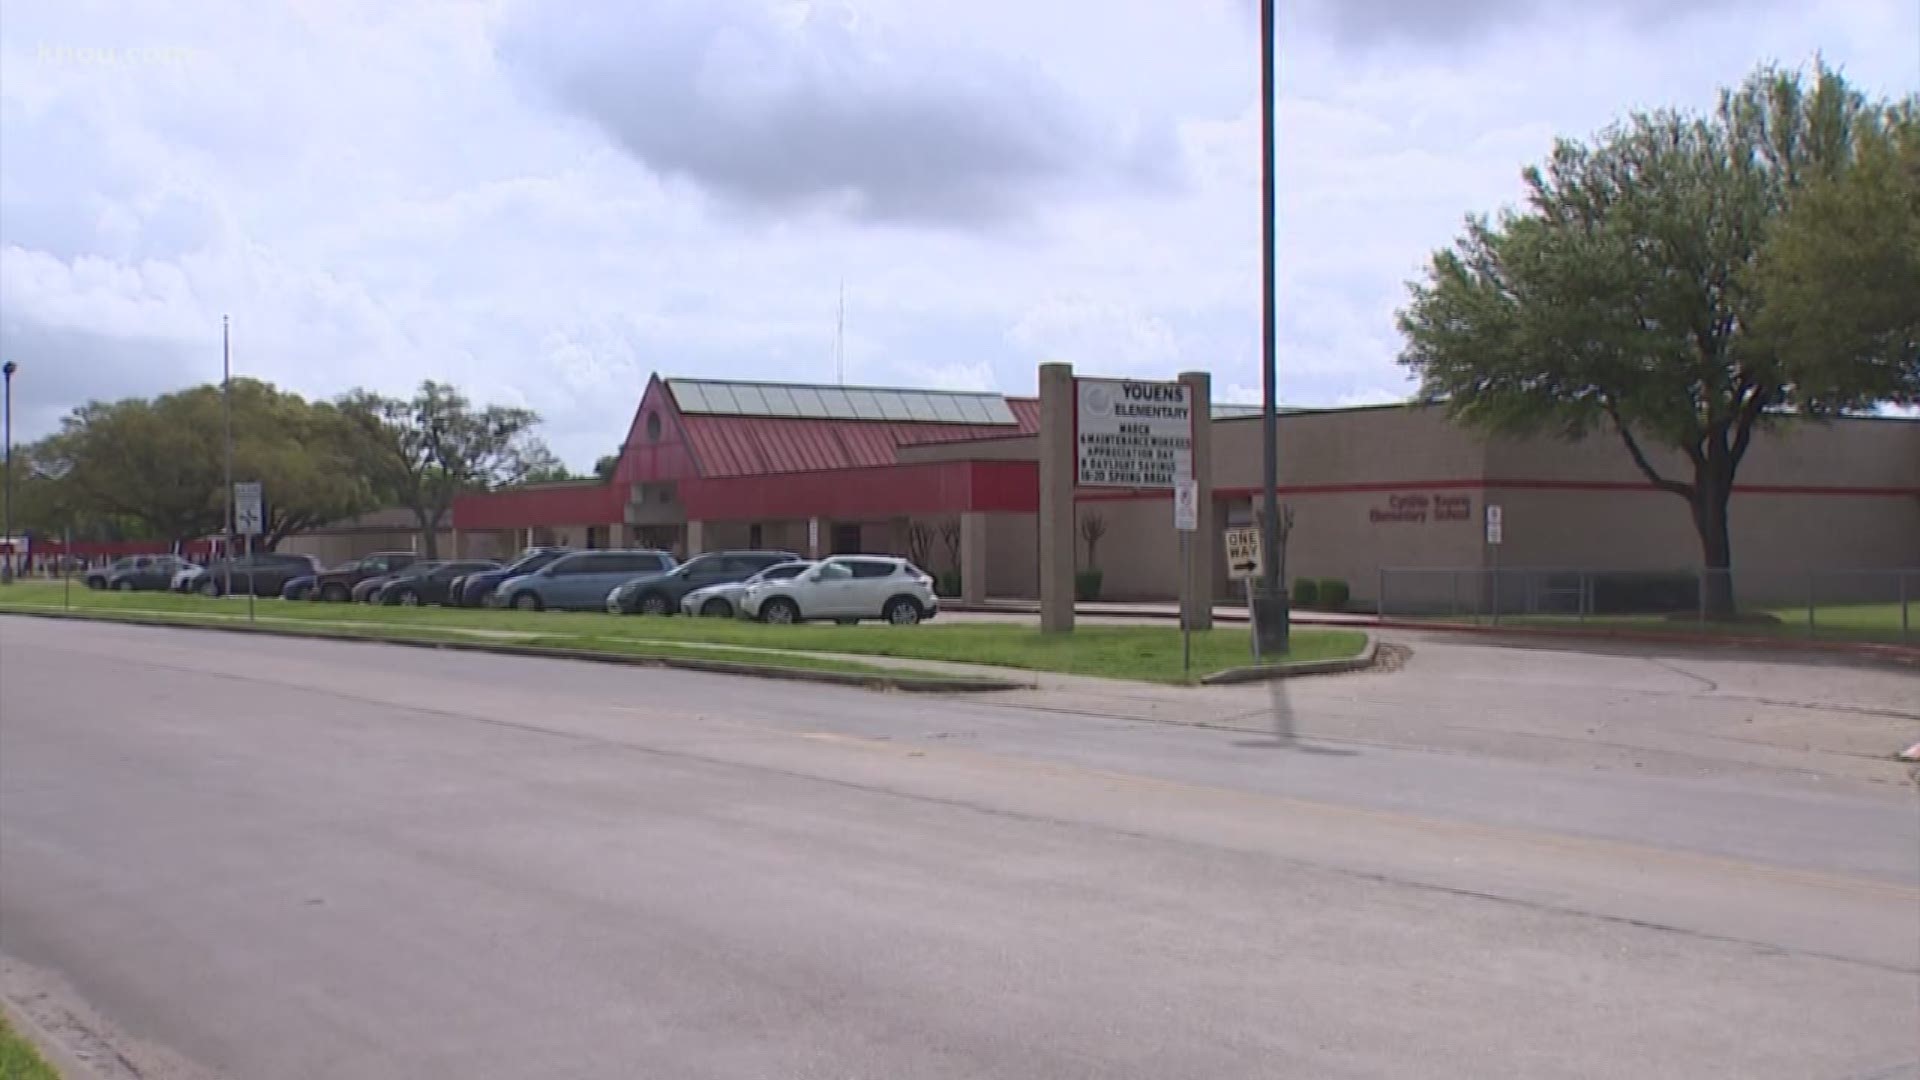 Local district leaders say they're working with county health officials on best ways to keep the community safe while also educating students.